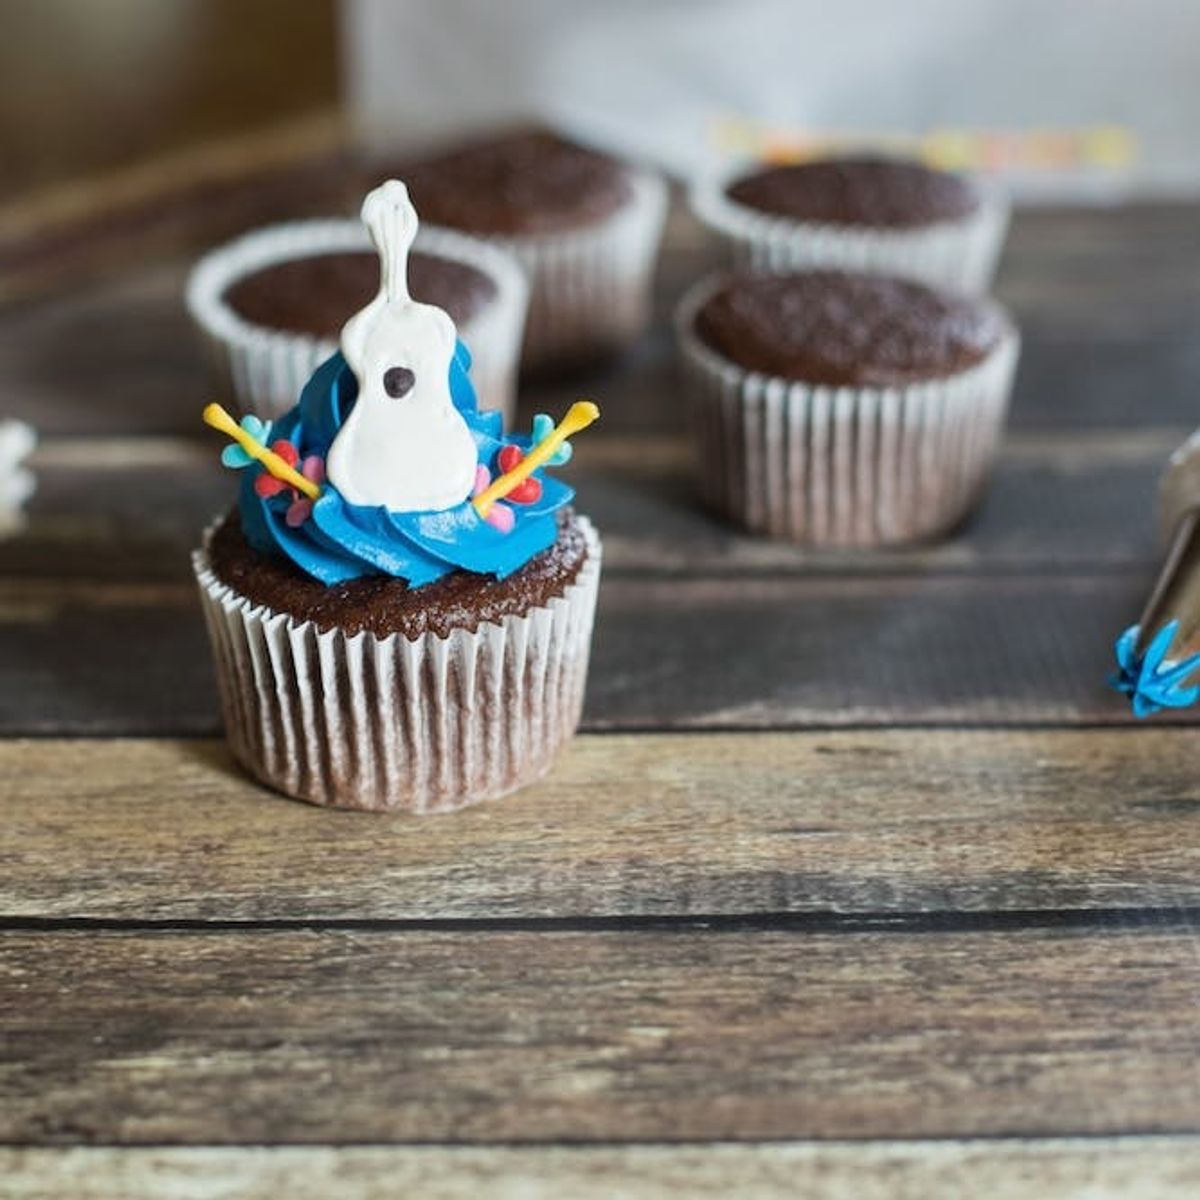 10 Disney Treats That Are *Almost* Too Cute to Eat